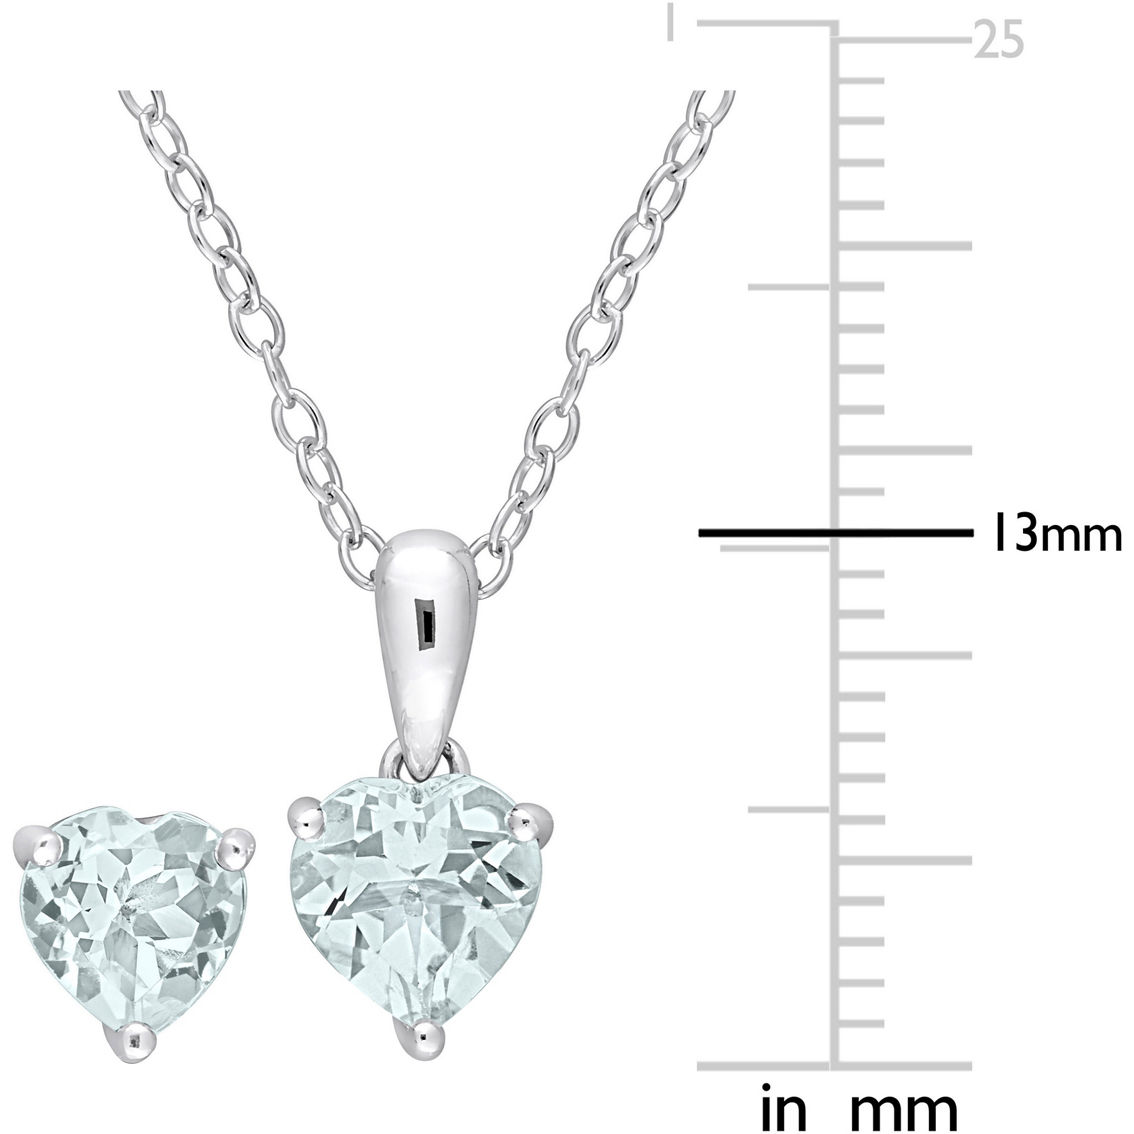 Sofia B. Sterling Silver Heart Aquamarine Solitaire Necklace and Earrings 2 pc. Set - Image 4 of 4